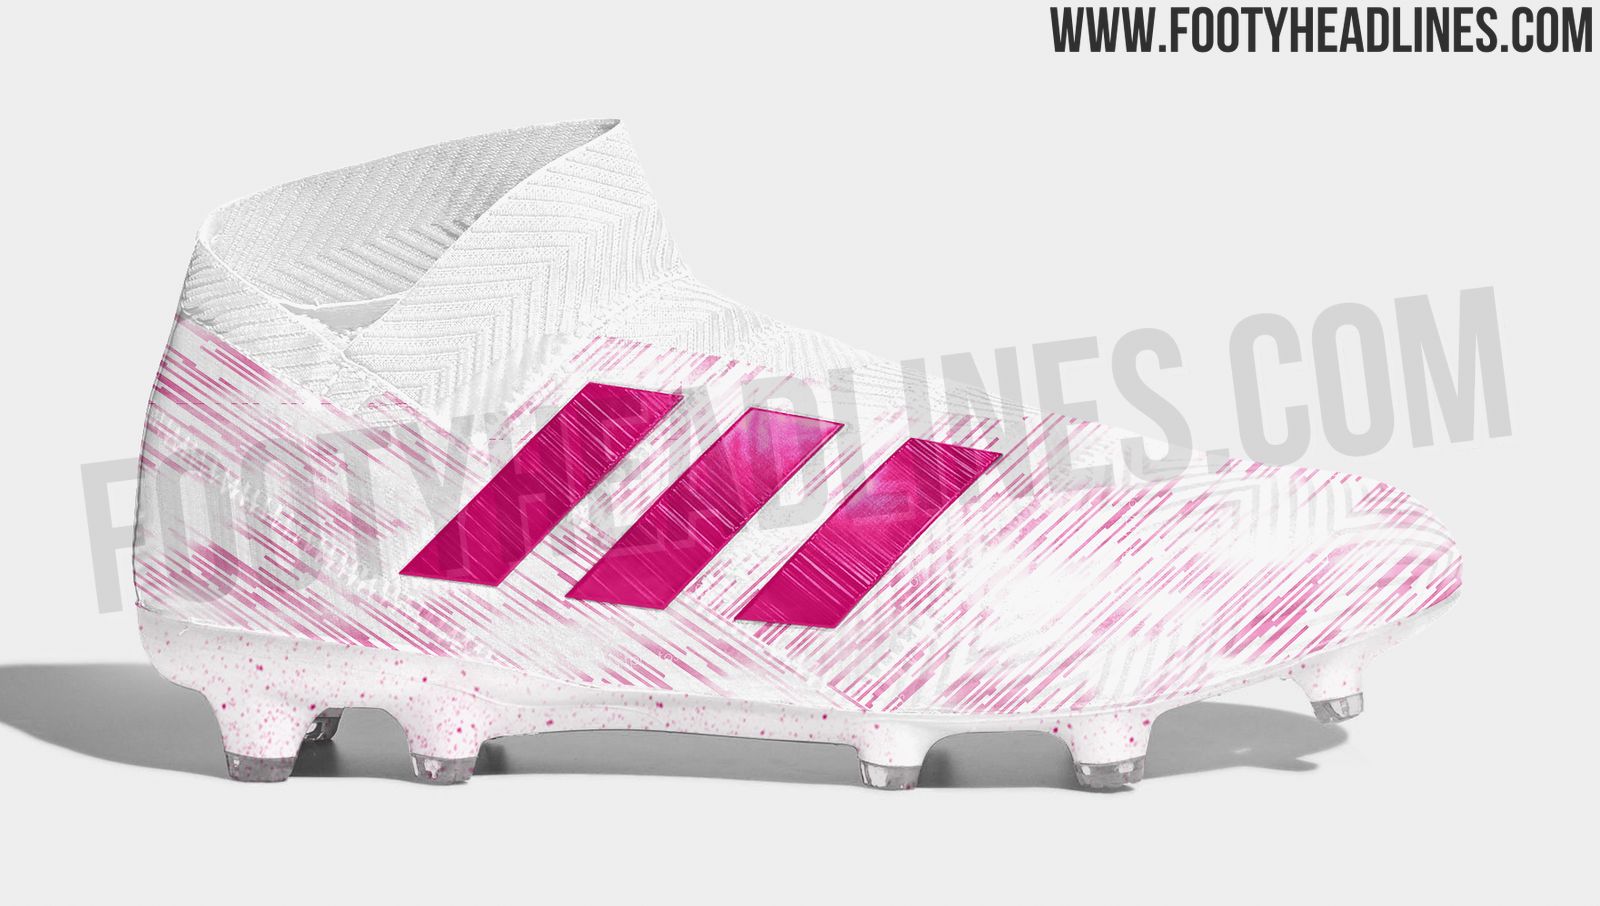 OFFICIAL Pictures: White / Pink Adidas Nemeziz 'Virtuso Pack' 2019 Boots Leaked Footy Headlines